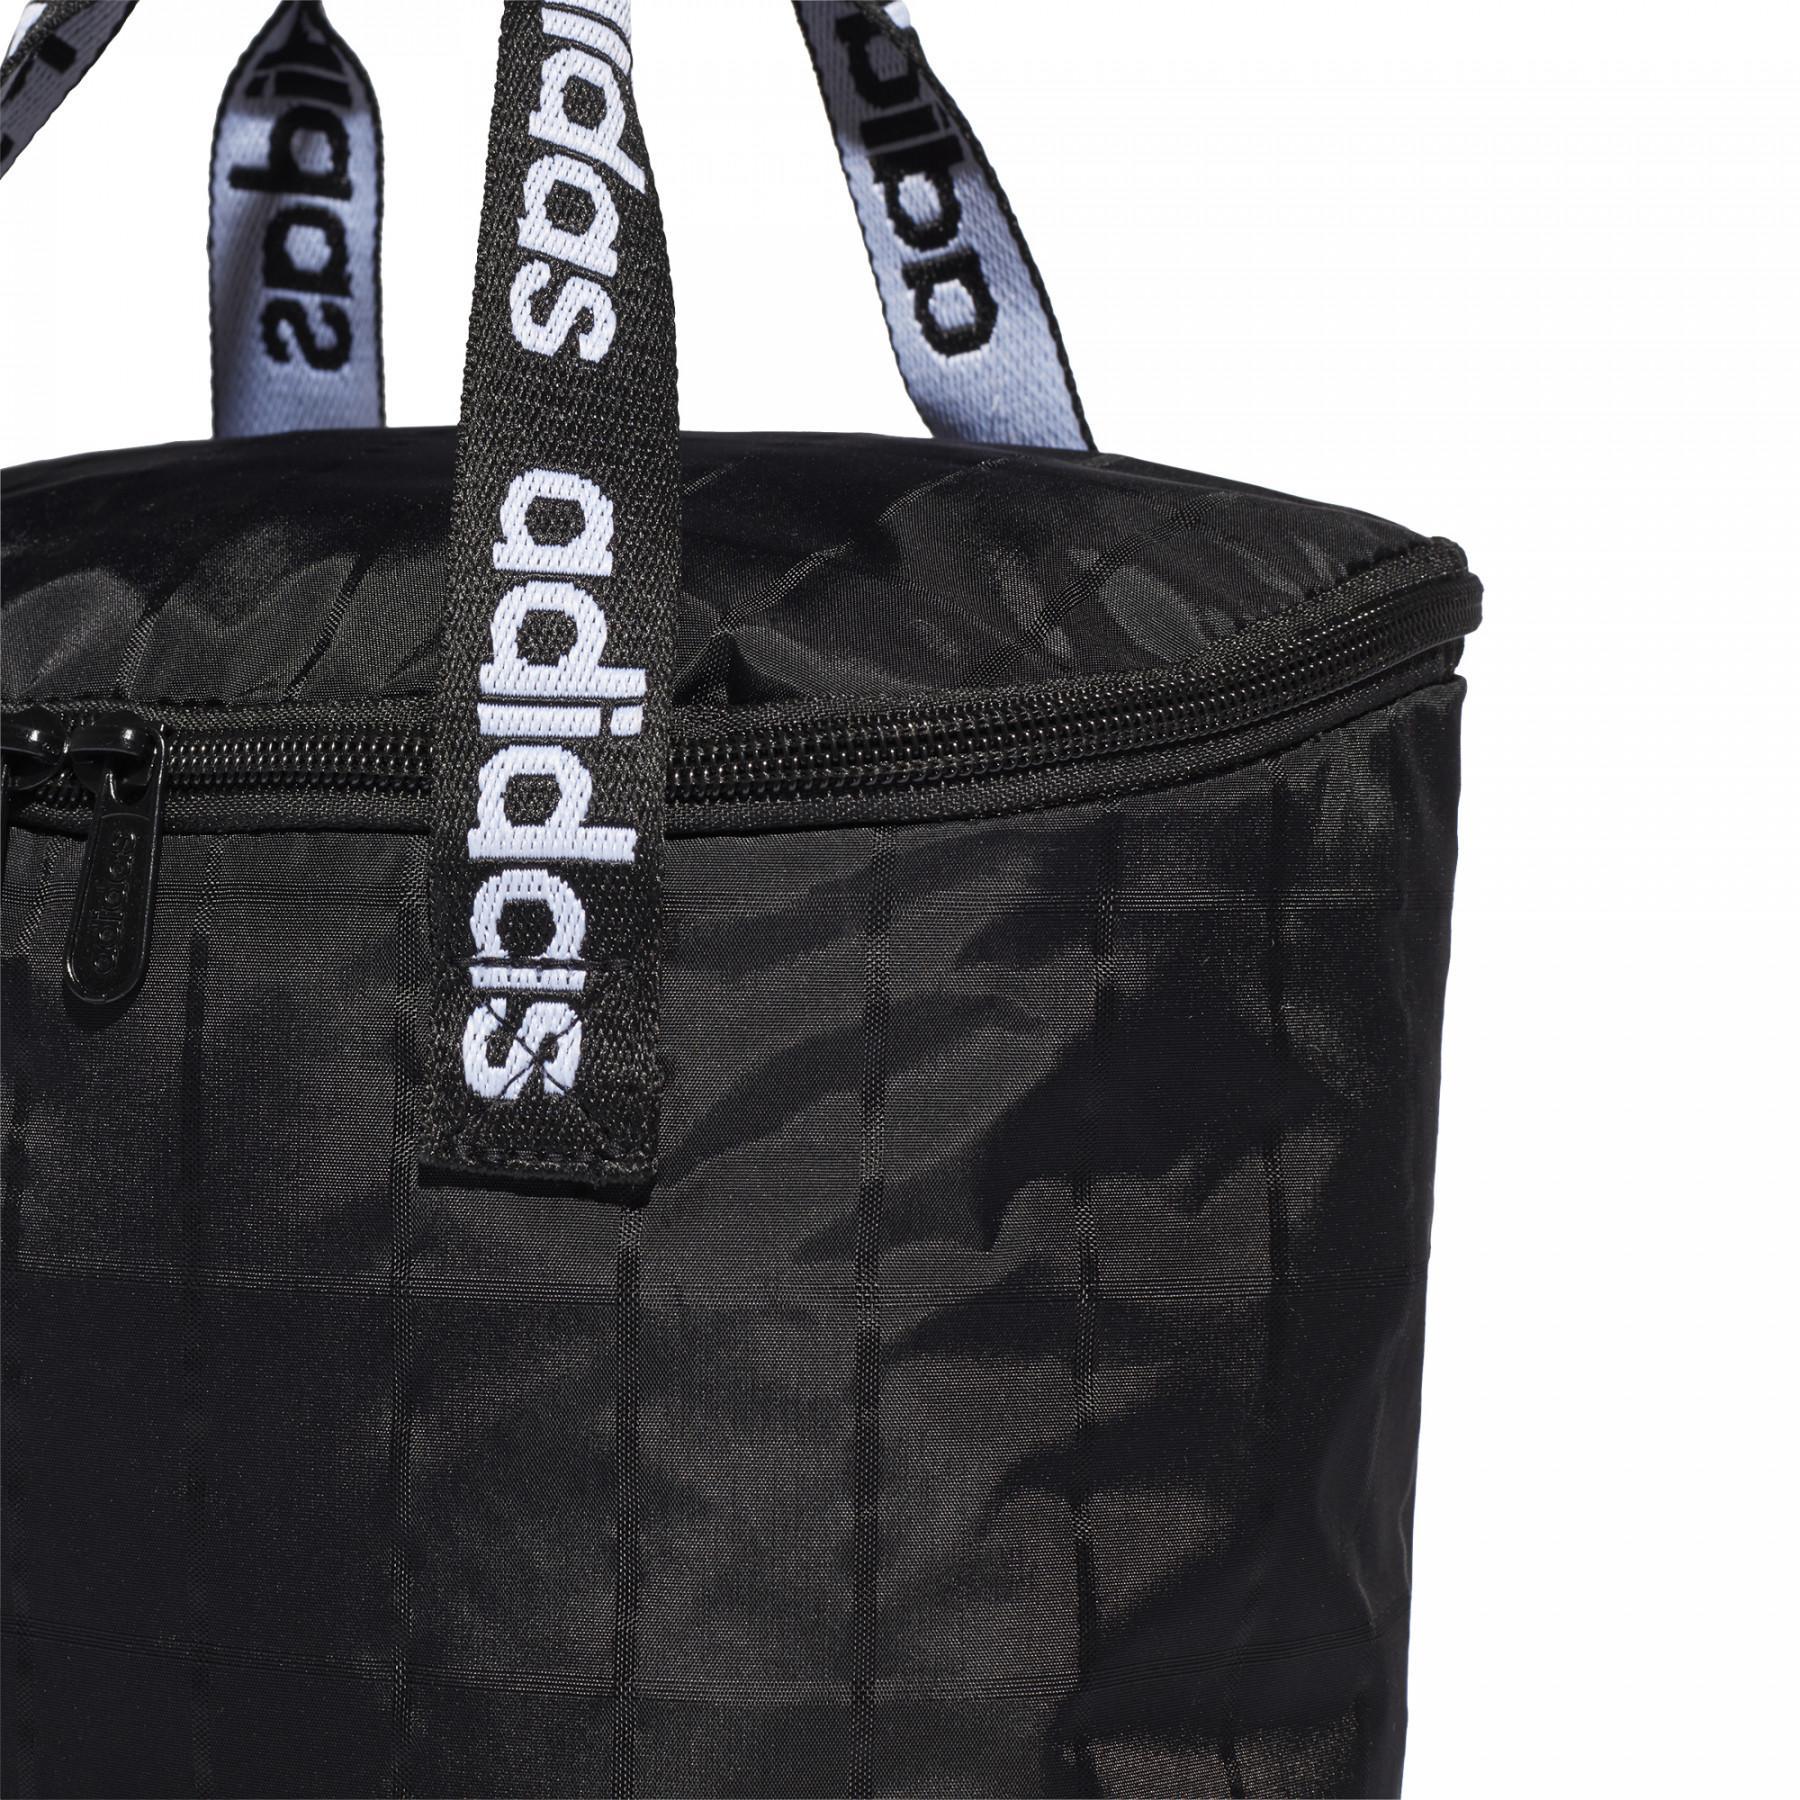 Women's backpack adidas T4H 2